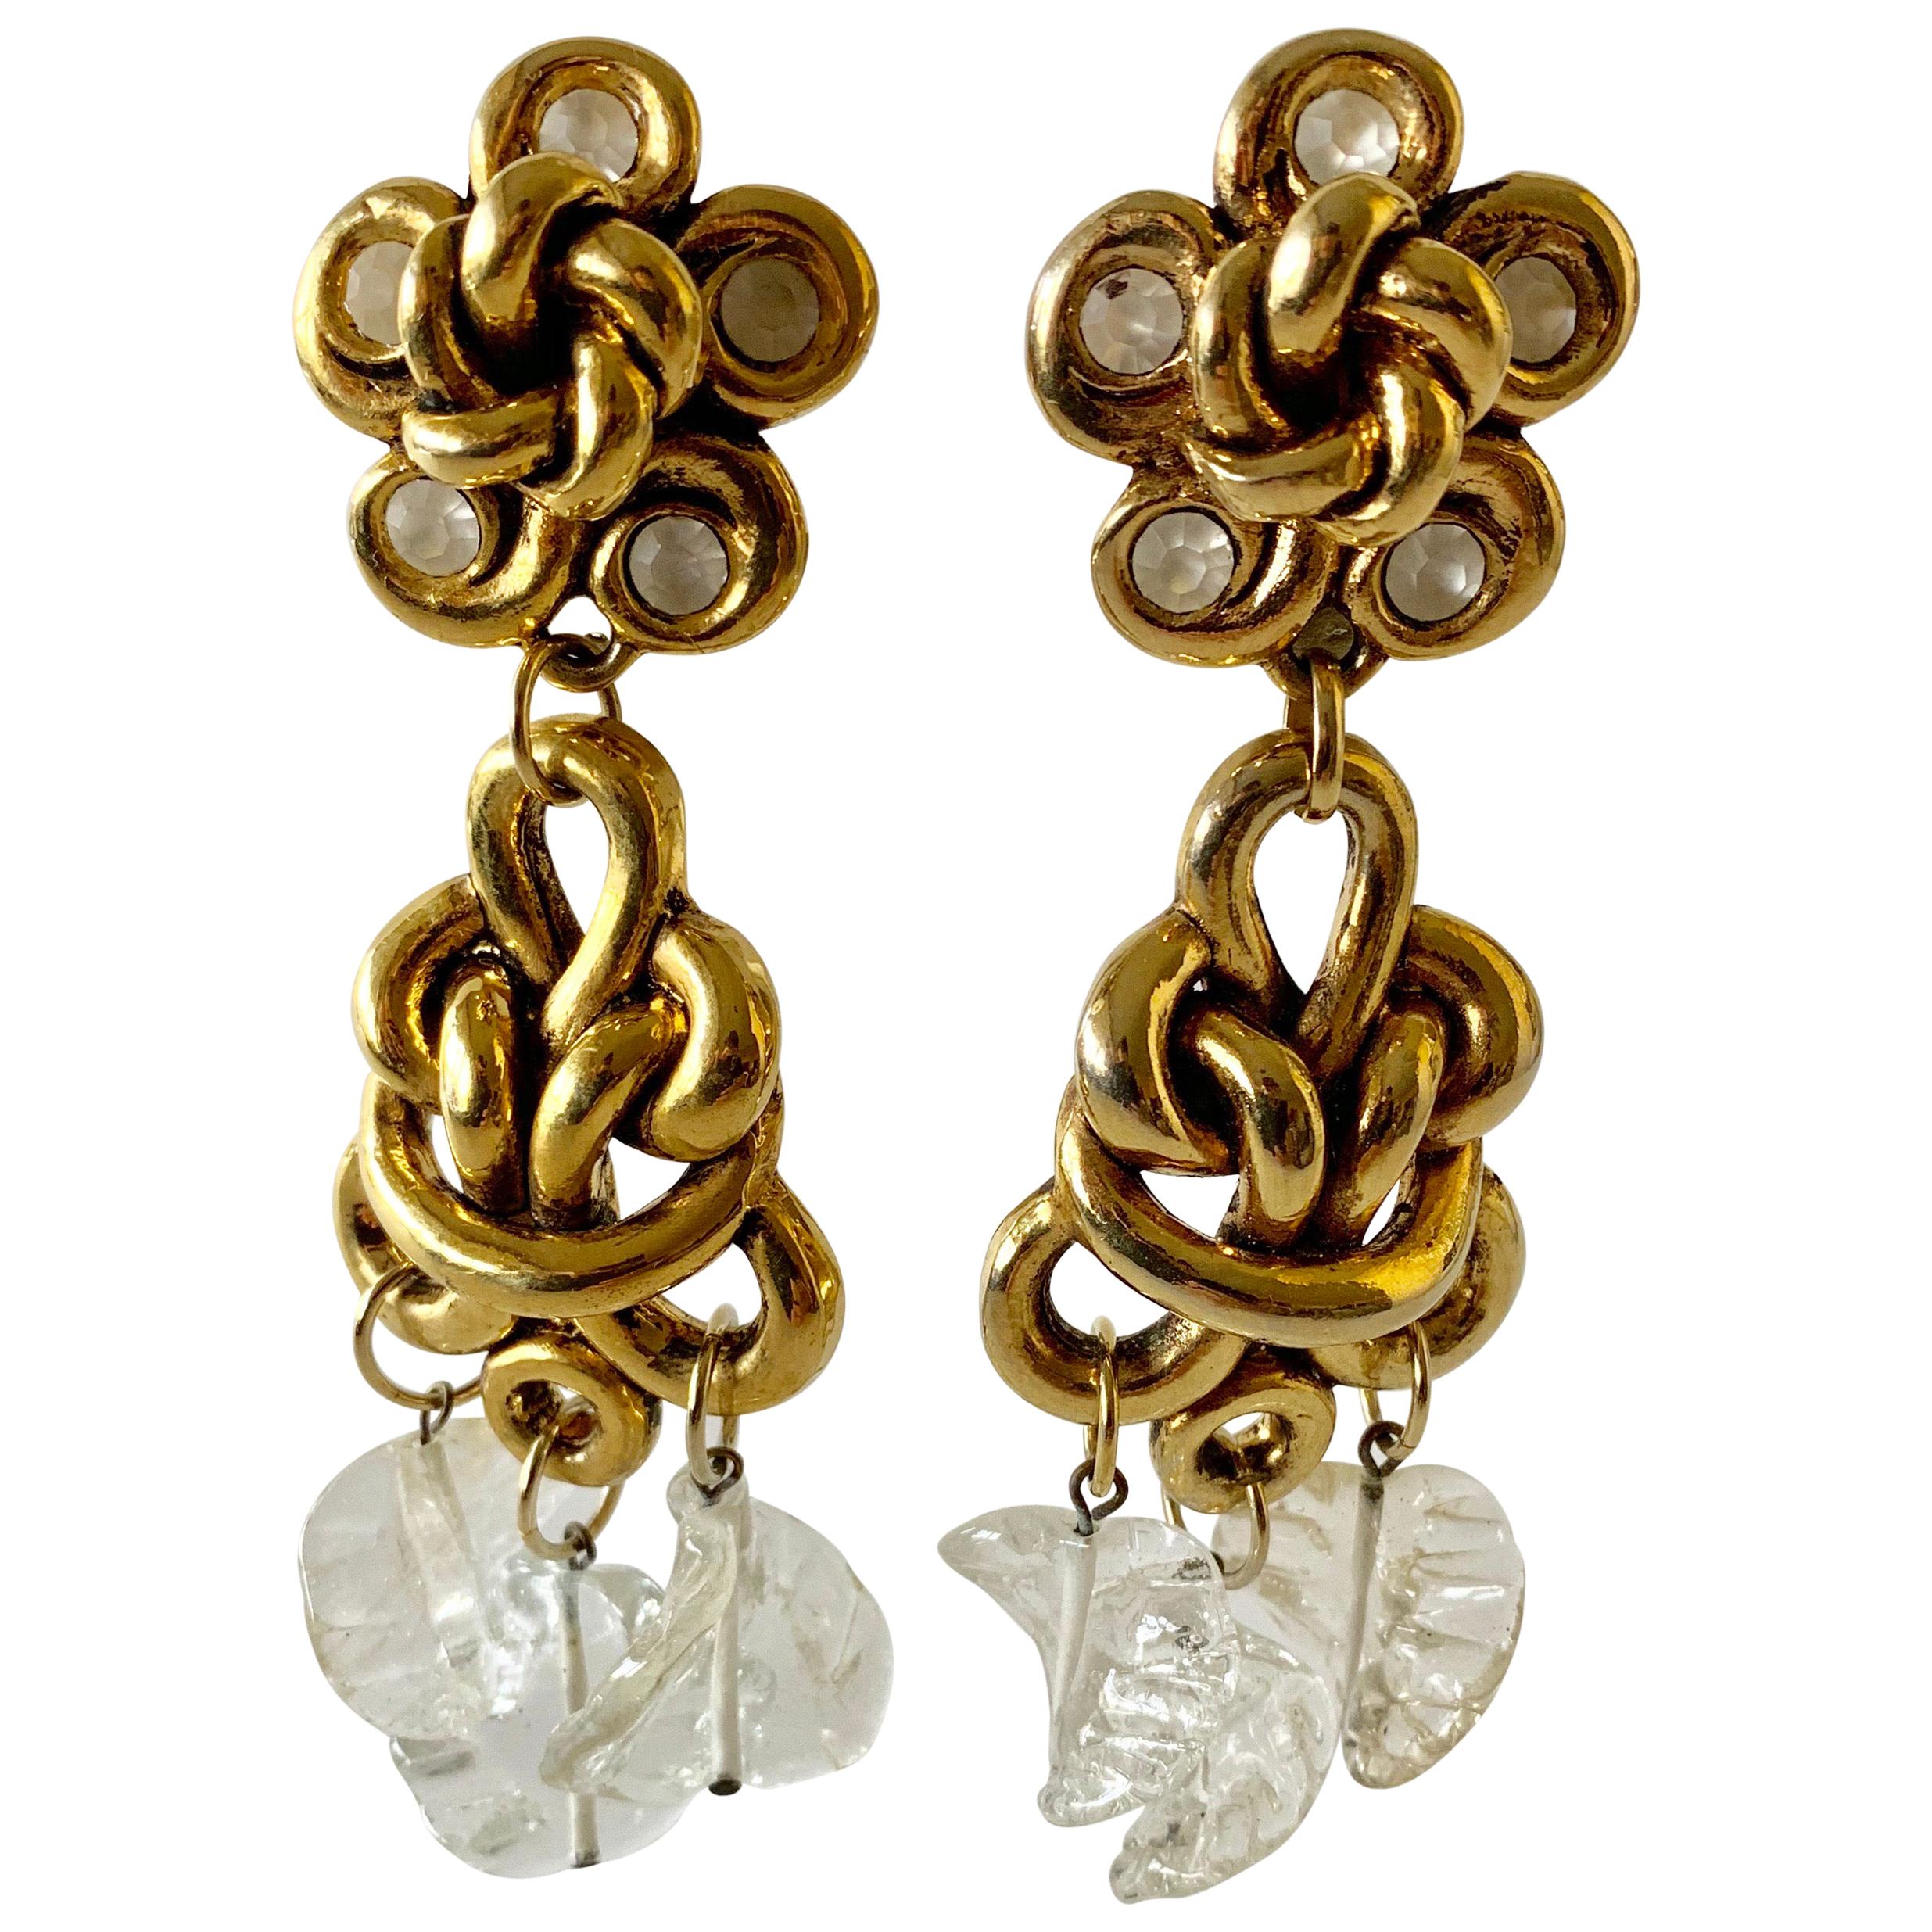 Vintage Gilt knotted French Statement Earrings 